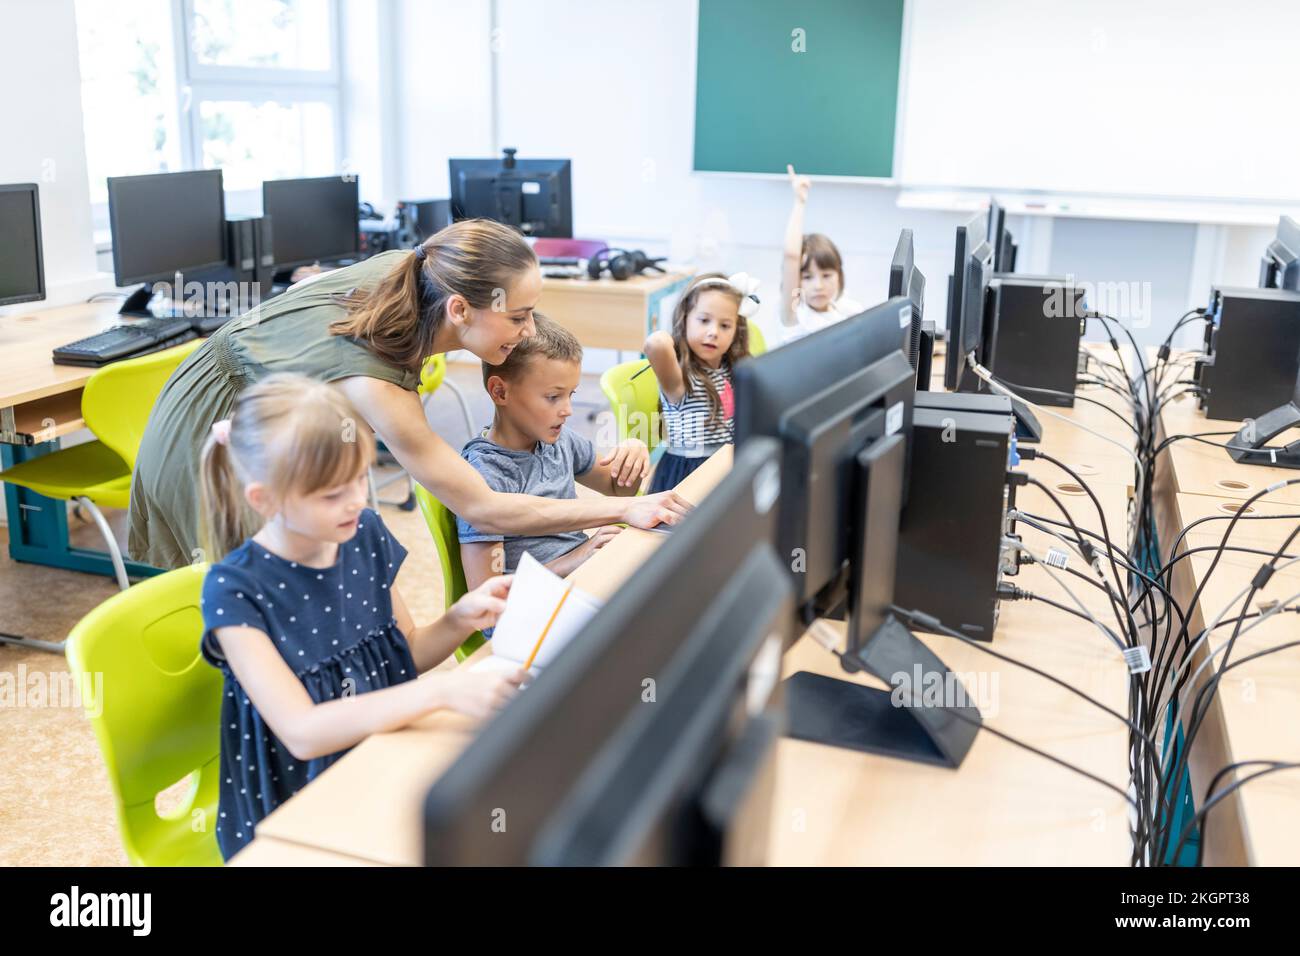 Teacher helping students studying through E-learning at school Stock Photo